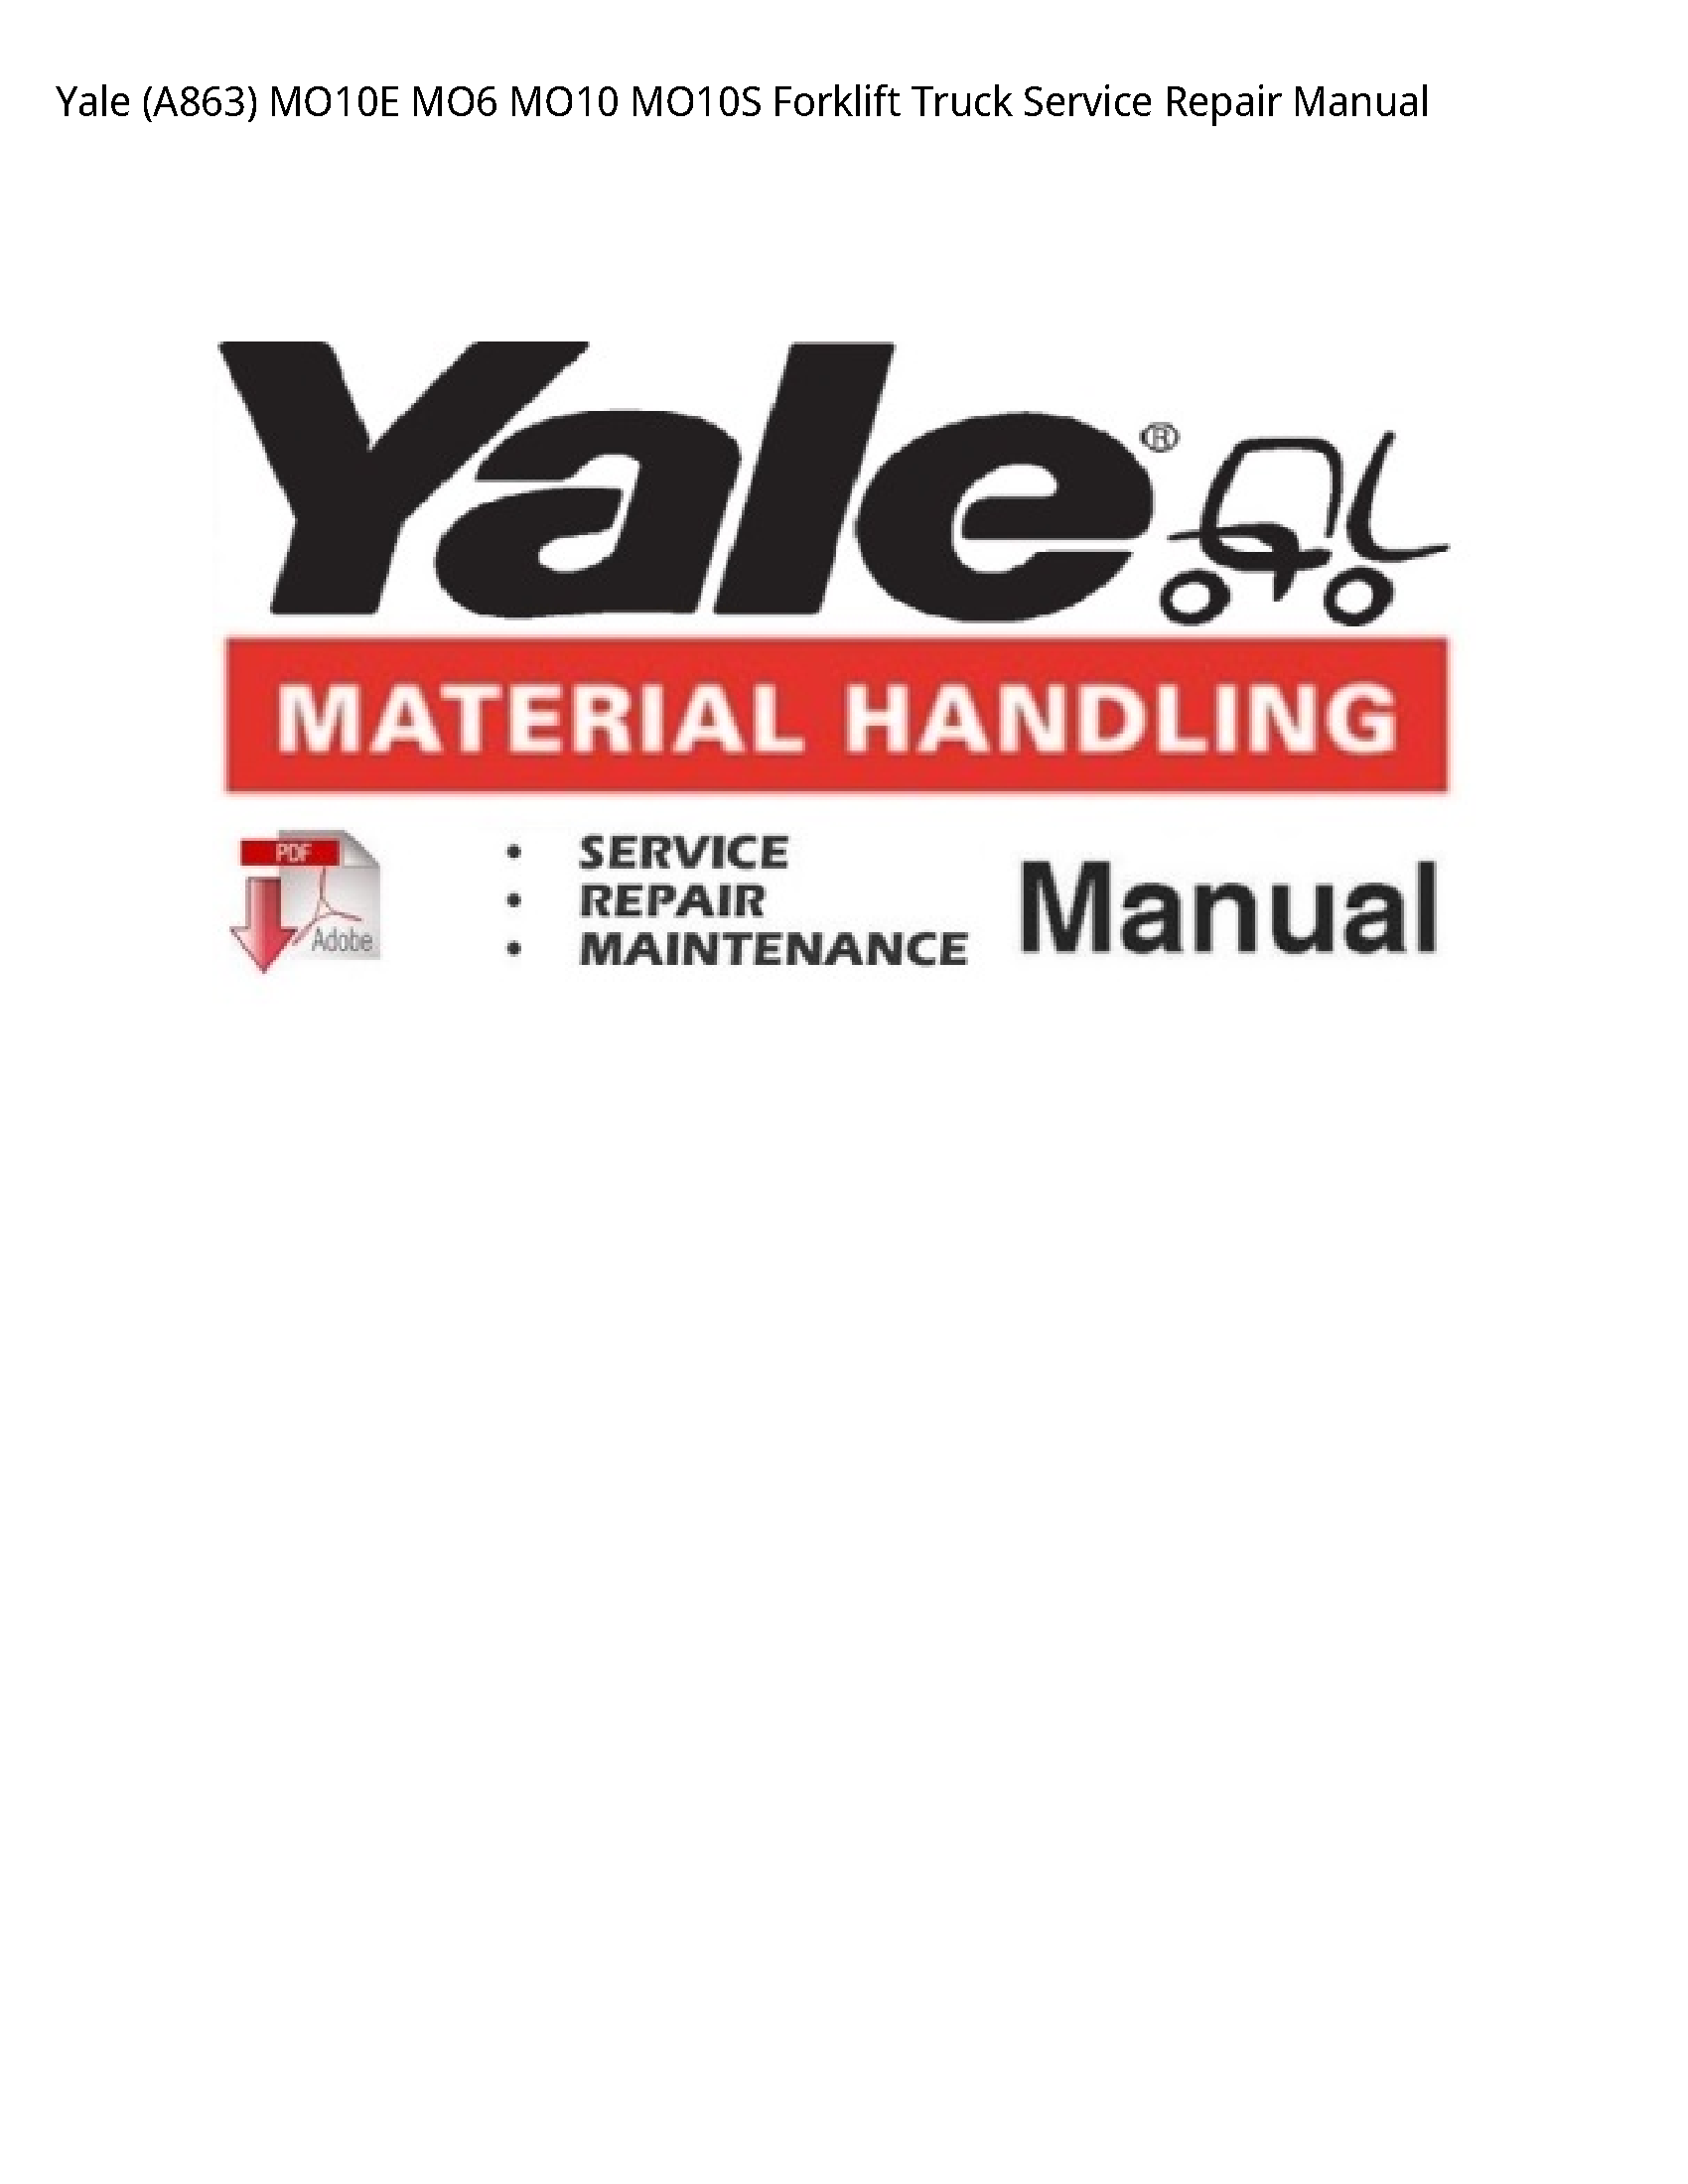 Yale (A863) Forklift Truck manual